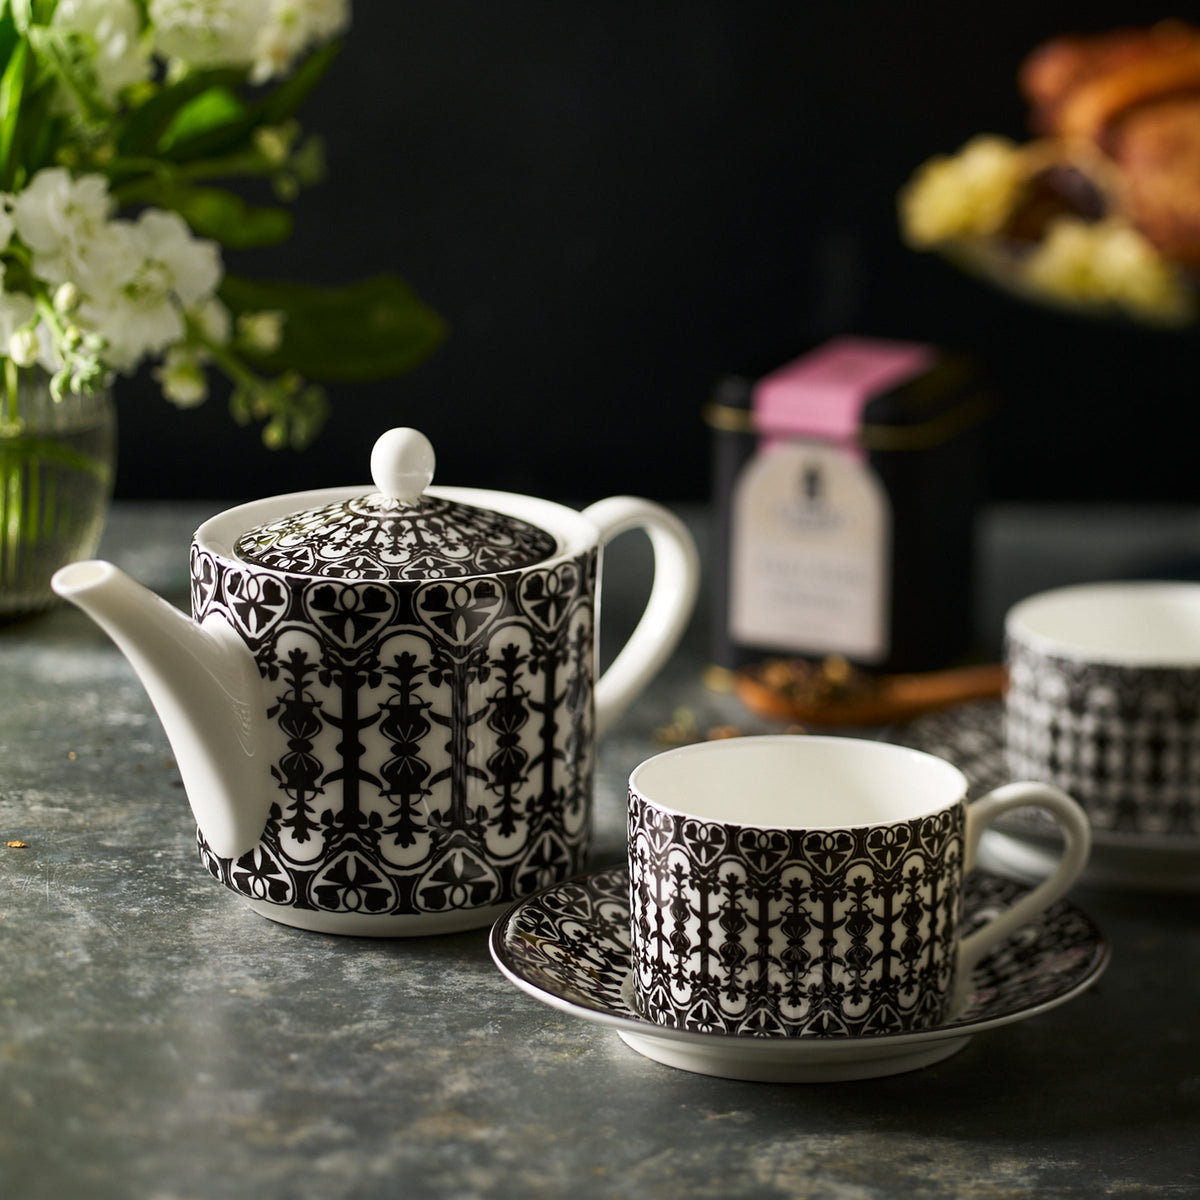 A black and white patterned teapot with matching Casablanca Cups &amp; Saucers, Set of 2 by Caskata is placed on a table. Nearby are flowers in a vase, a tin of tea, and a plate of baked goods, creating an inviting scene with elegant dinnerware.